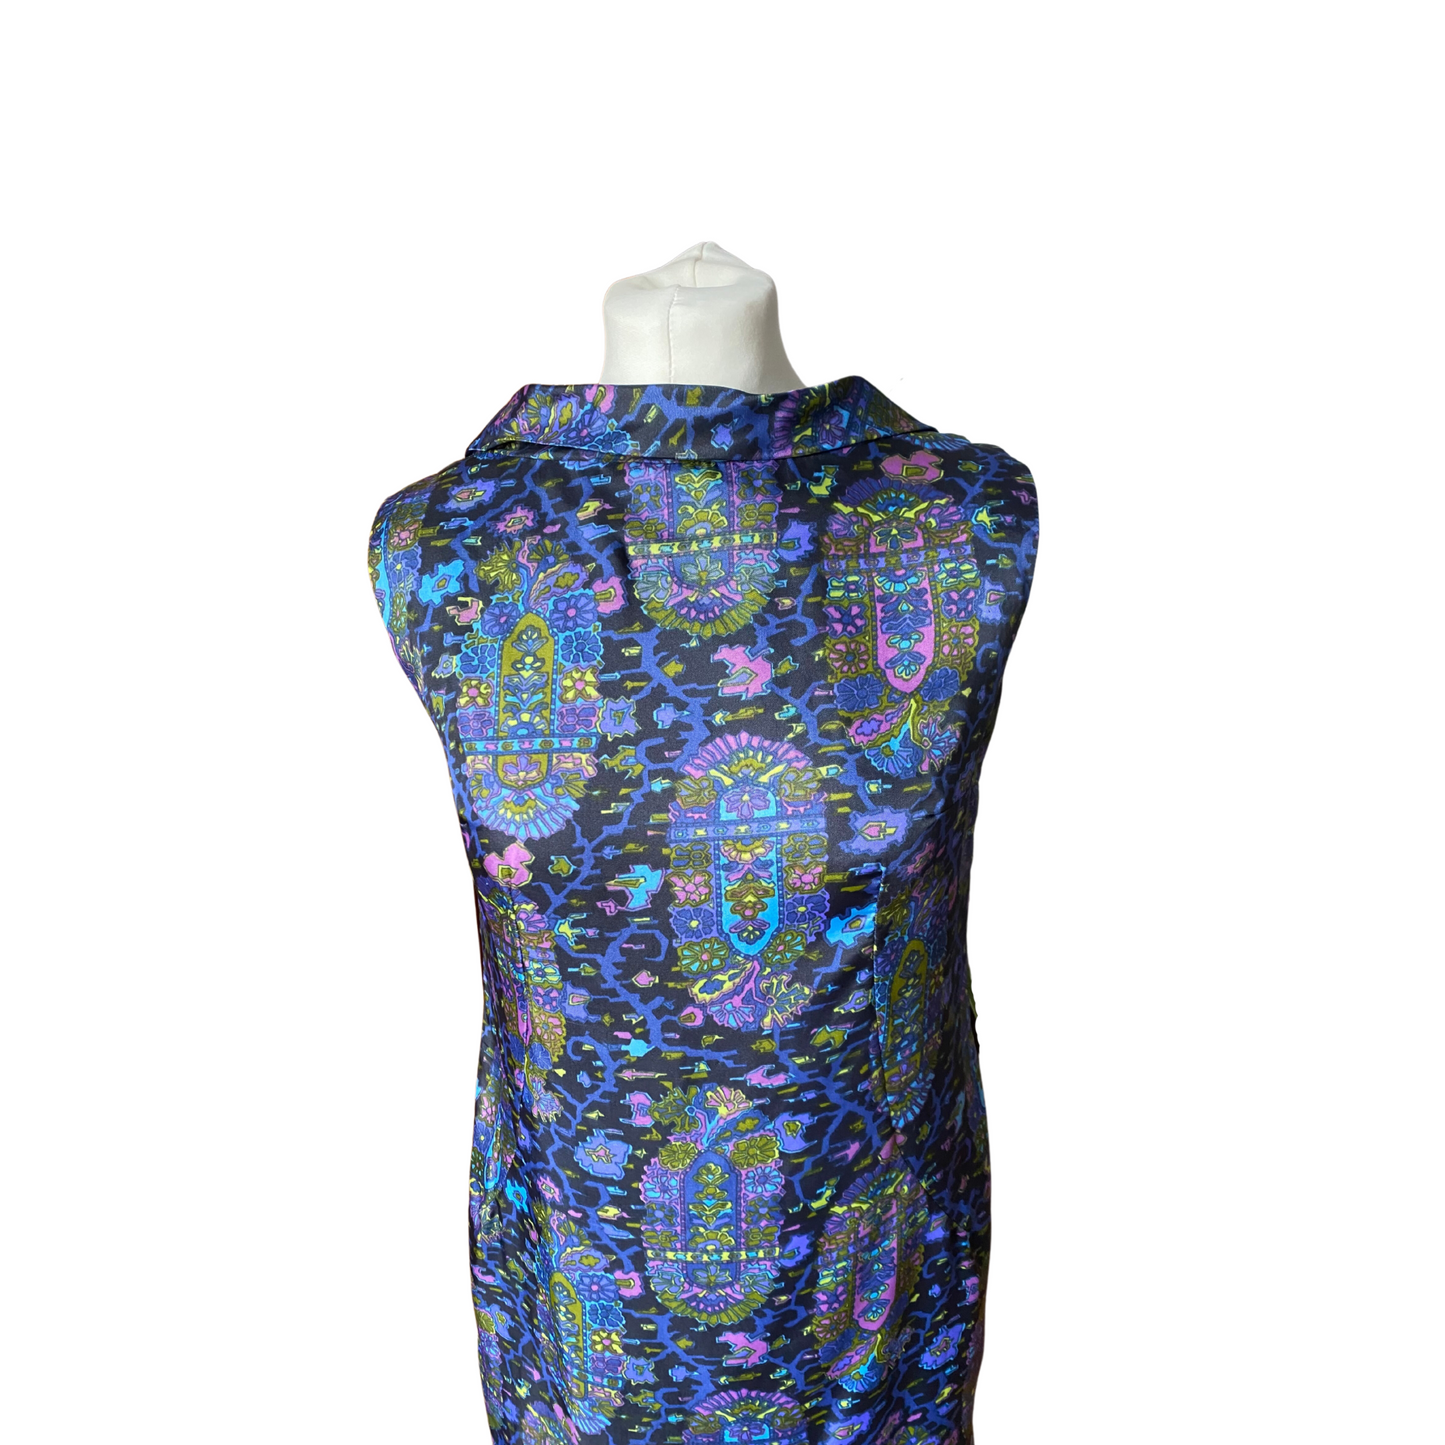 Victor Jocelyn designer pencil dress with stained glass window effect